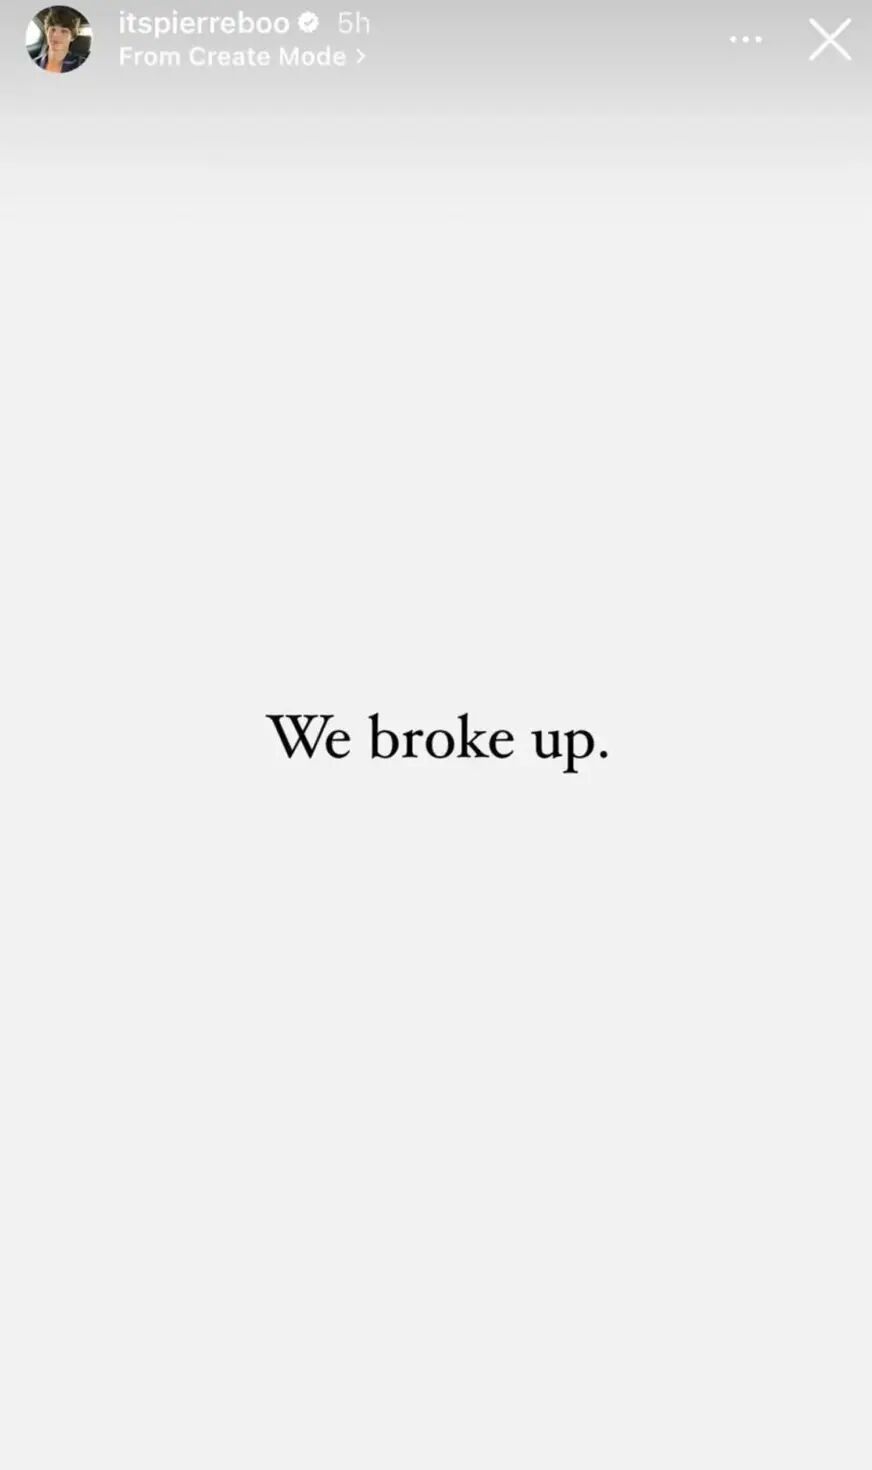 Pierre Boo's Instagram story with the text, "We broke up."